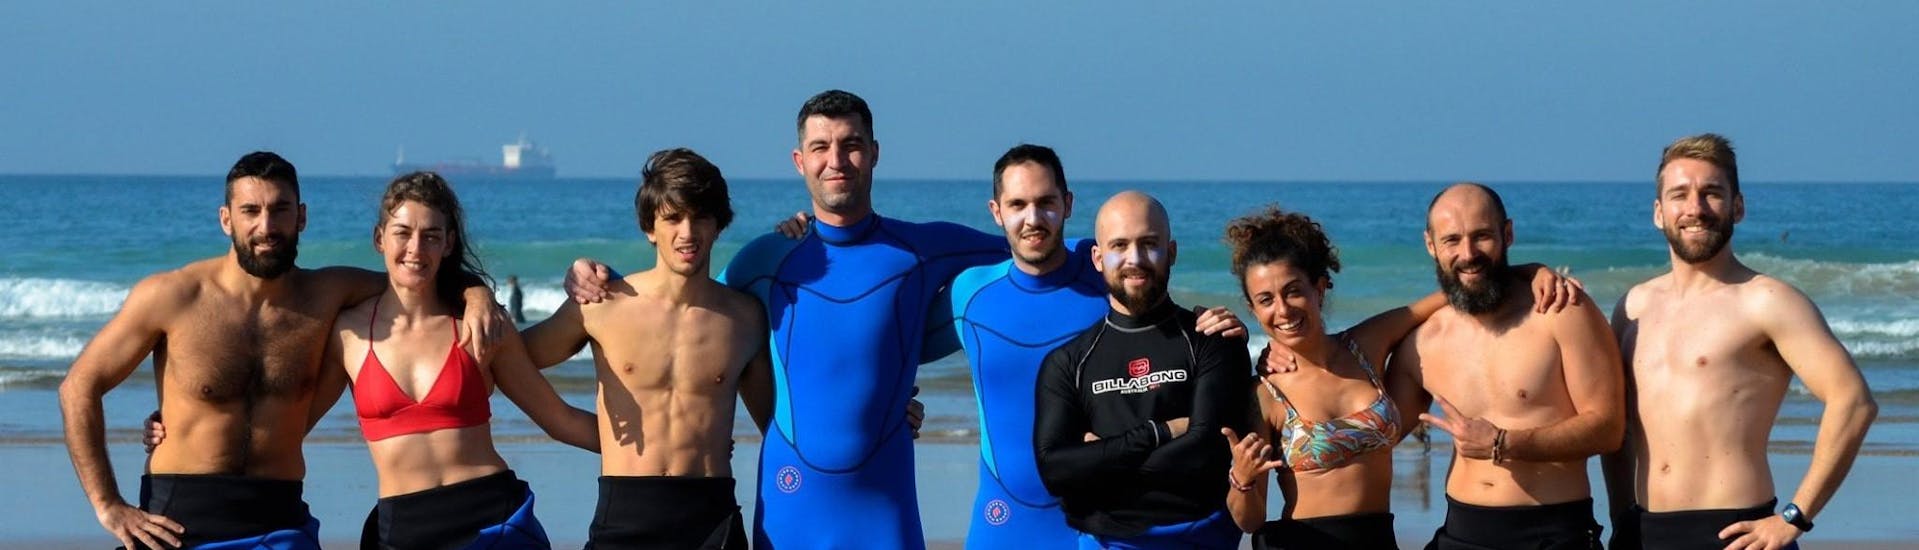 A group of surfers smiles together with the surf instructors of Latas Surf into the camera during their Surfing Lessons incl. video analysis - All Levels & Ages.